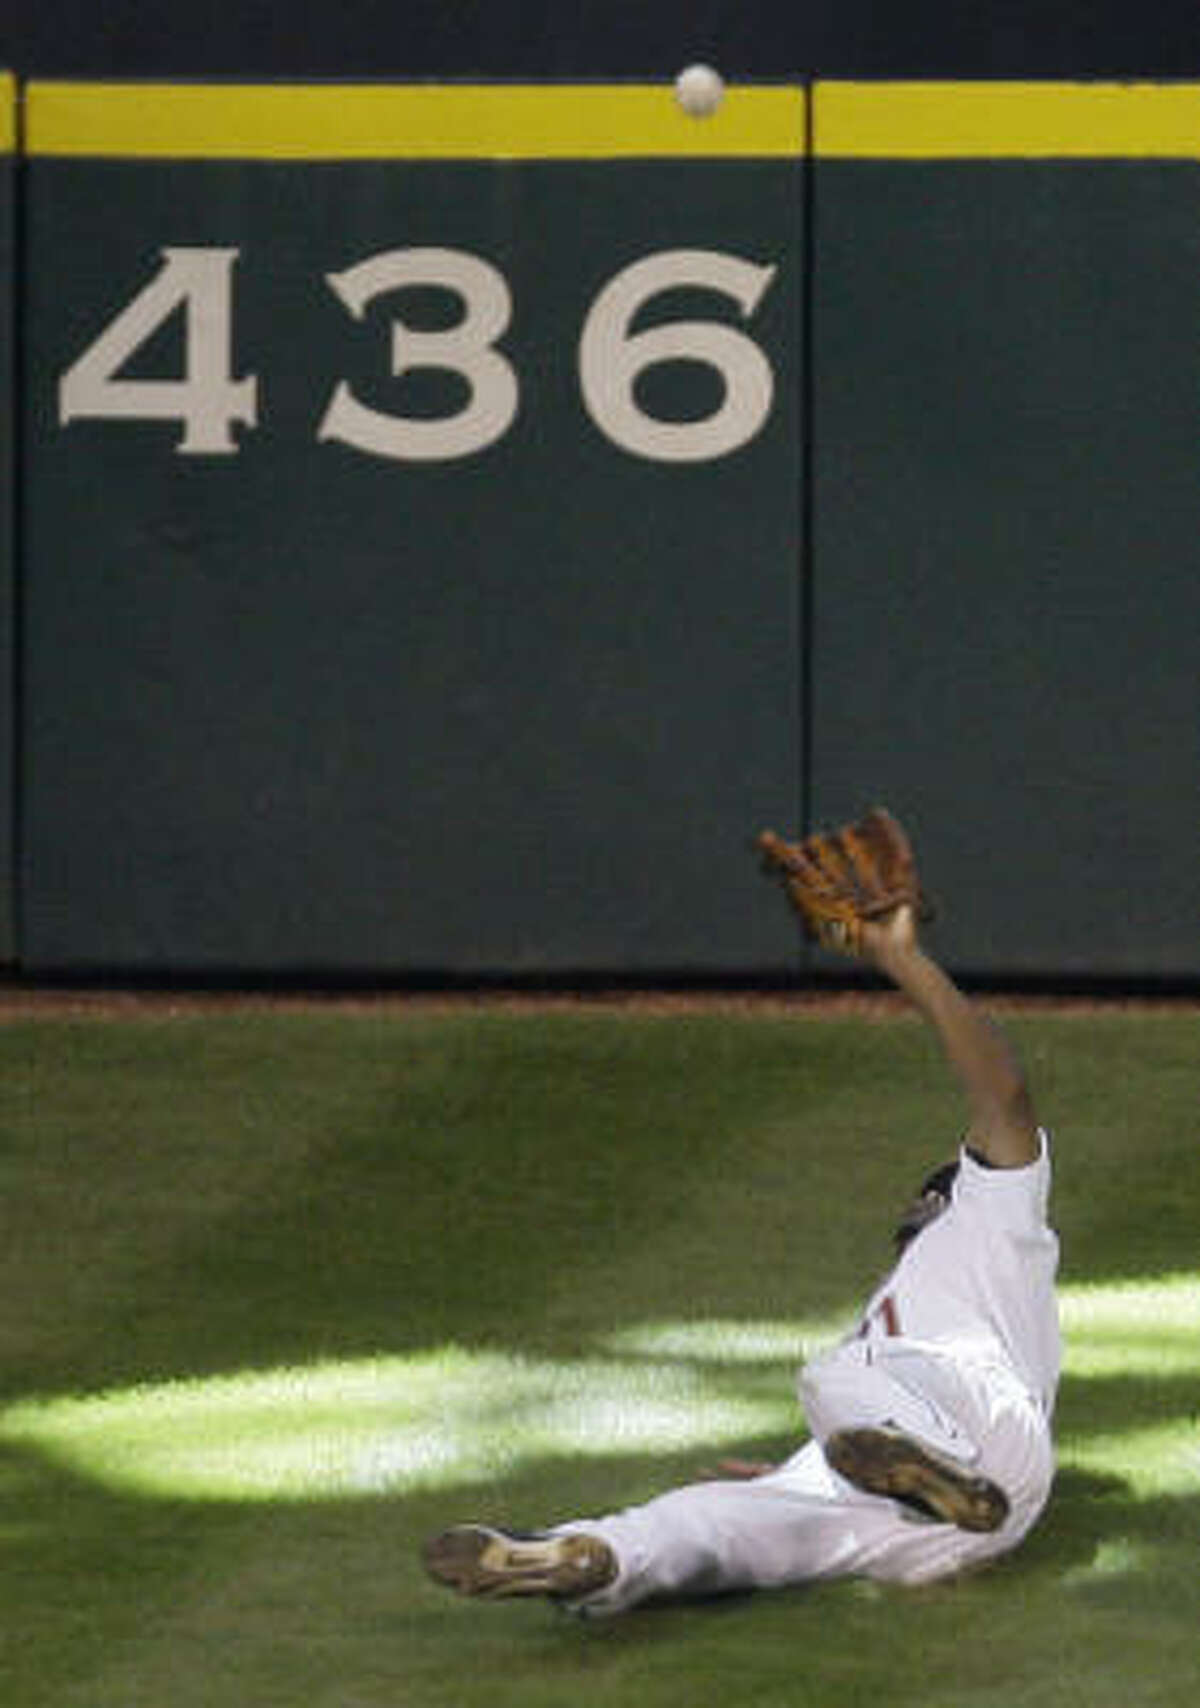 Michael Bourn - On Golden Hill Michael Bourn won Gold Gloves for his center field play in Houston in 2009 and 2010, and his deftness of Tal's Hill had something to do with those awards. His most memorable catch was this one against the Cubs' Micah Hoffpauir when Bourn fell down and still caught the ball while flat on his back.